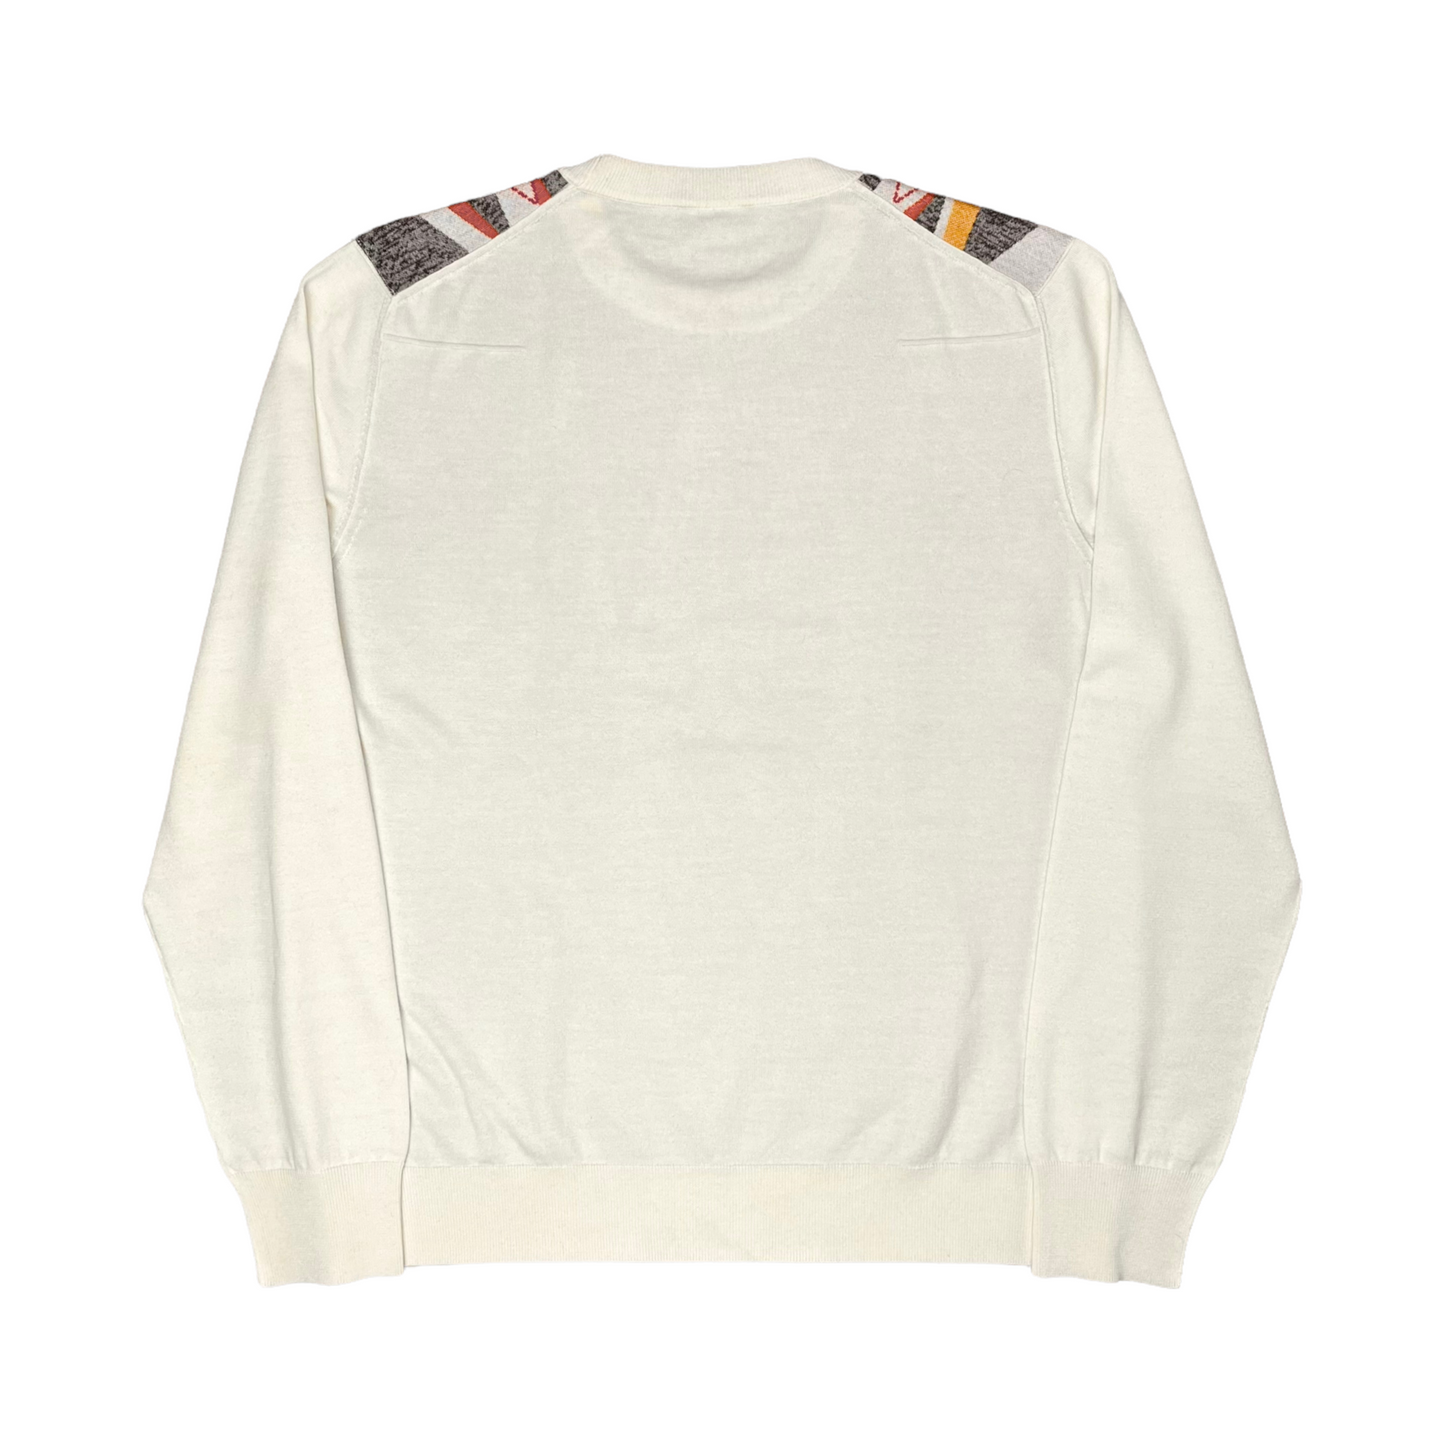 Dior Homme Multicolor Graphic Sweater - SS15